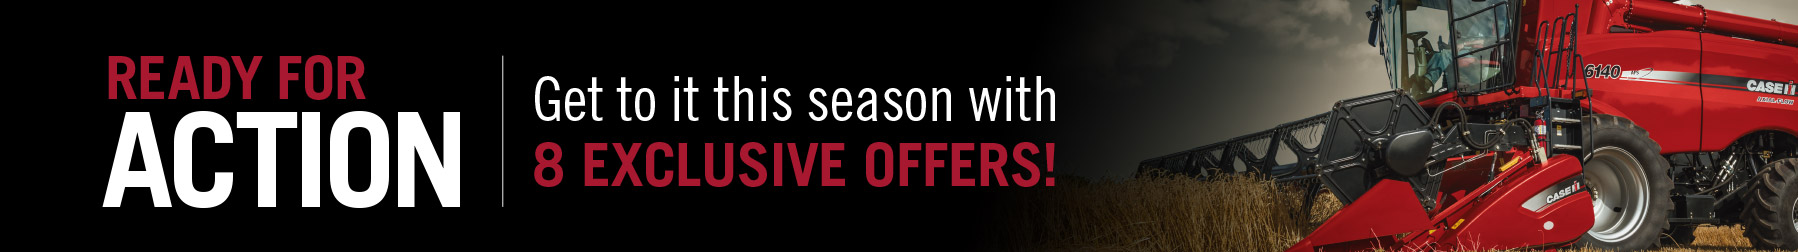 Ready for Action | Get to it this season with 8 exclusive offers!